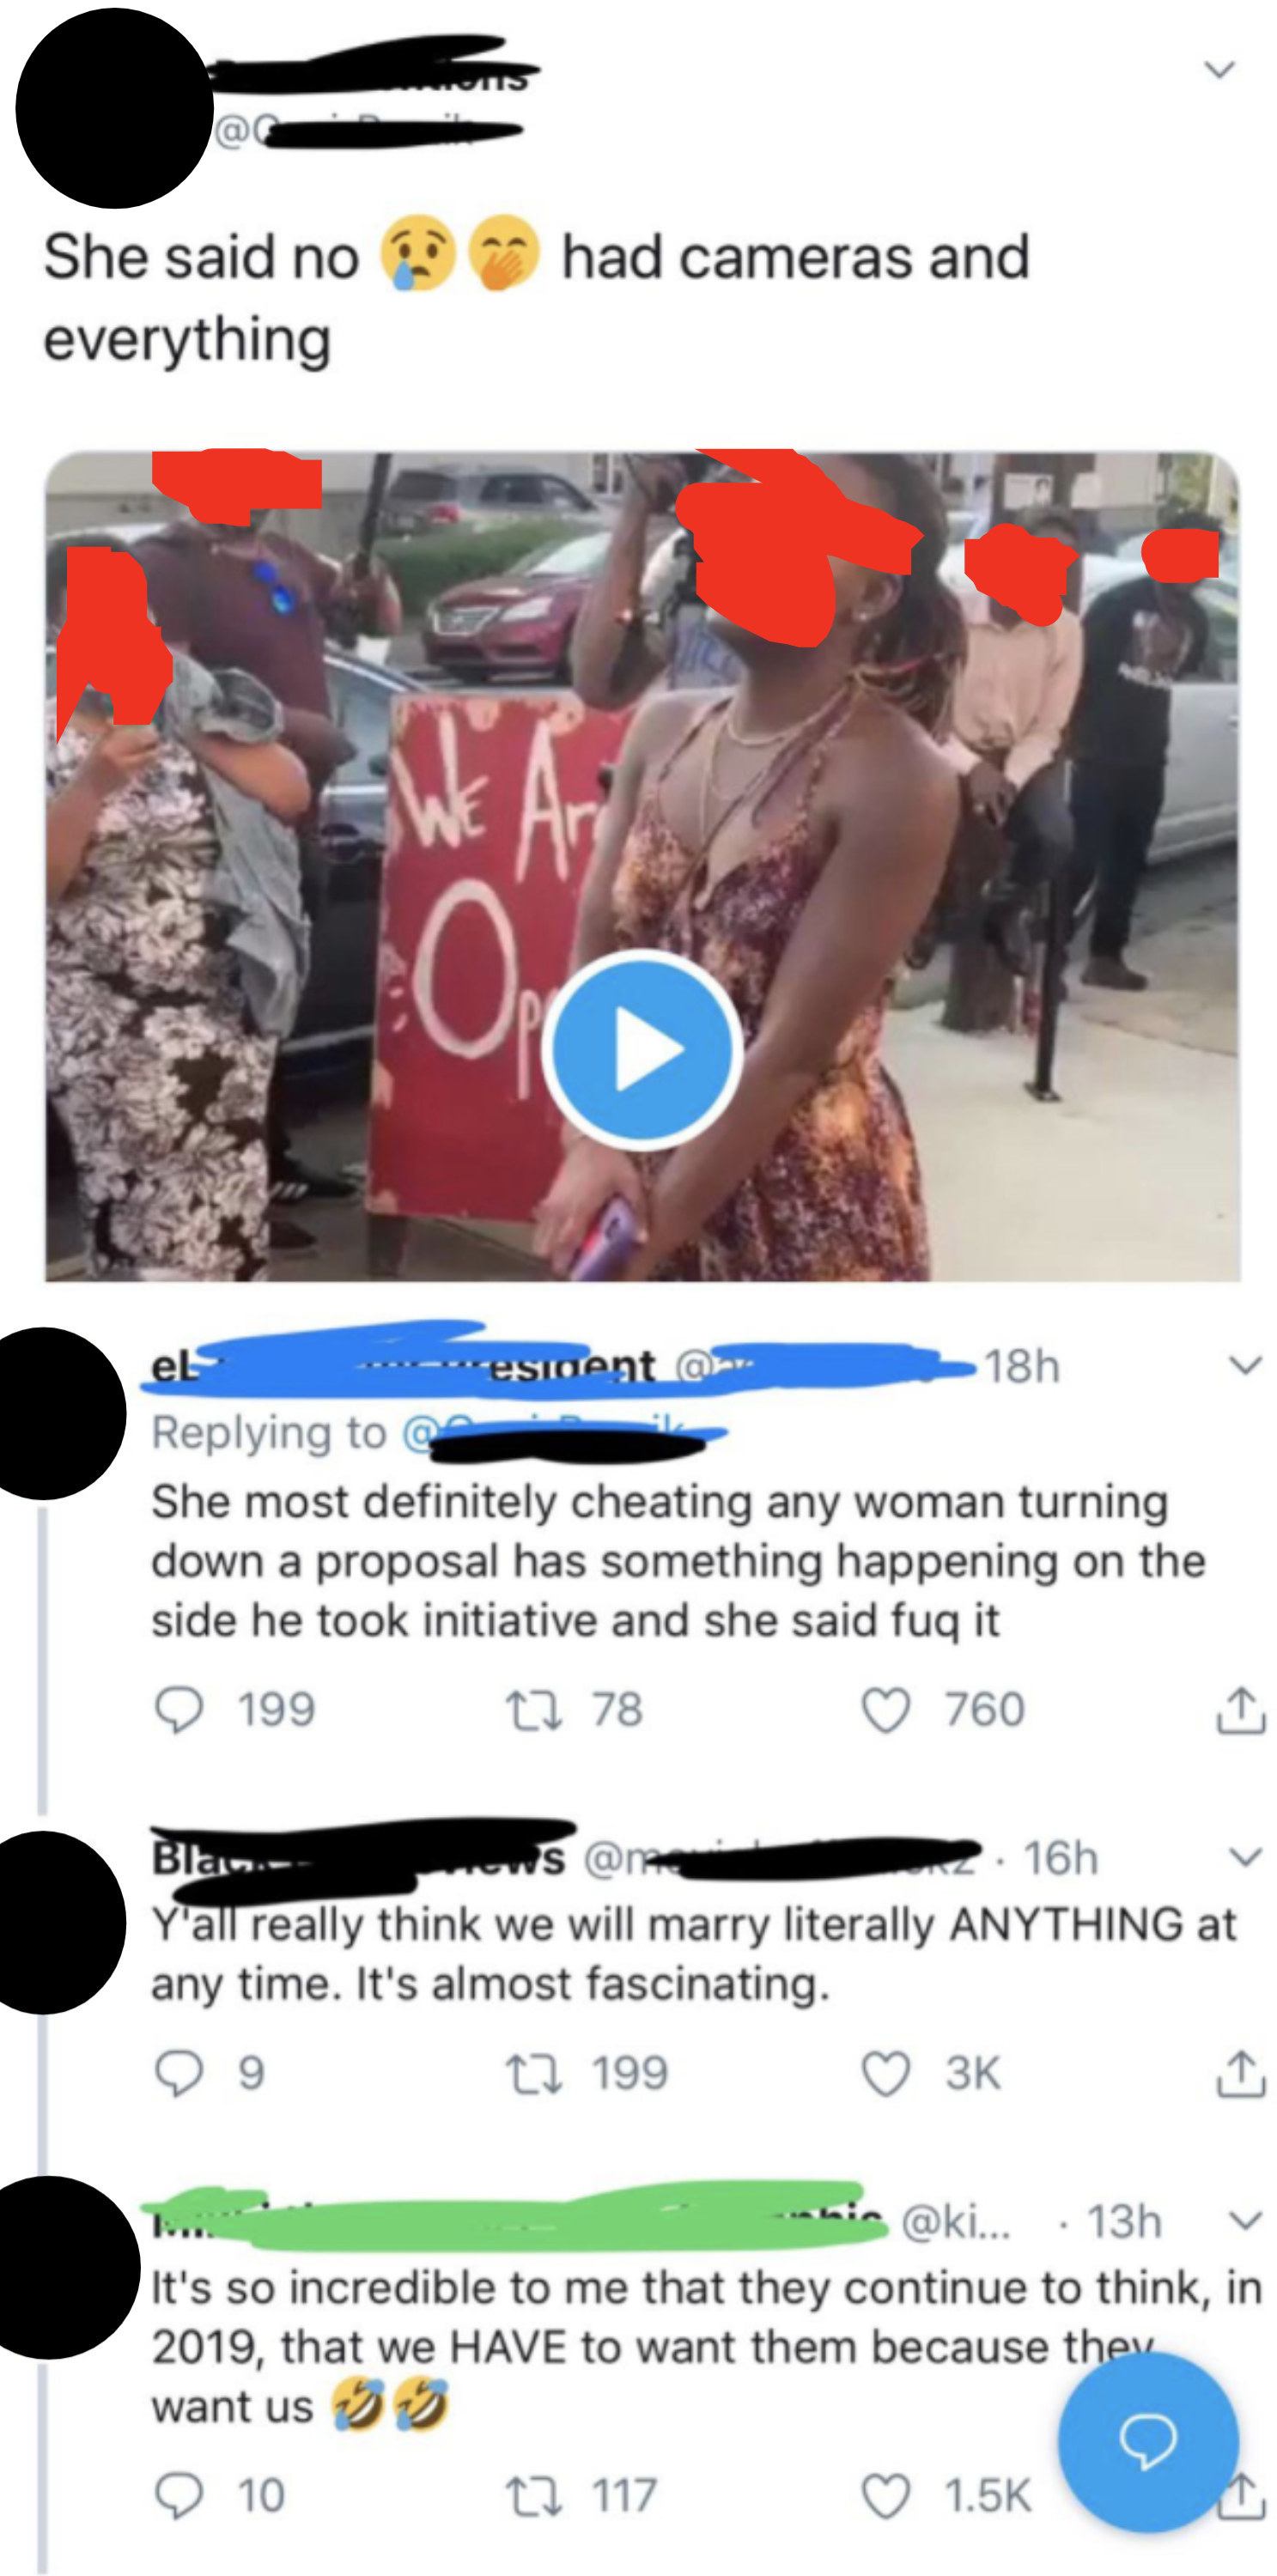 Man: &quot;She most definitely cheating — any woman turning down a proposal has something happening on the side he took initiative and she said fuq it&quot;